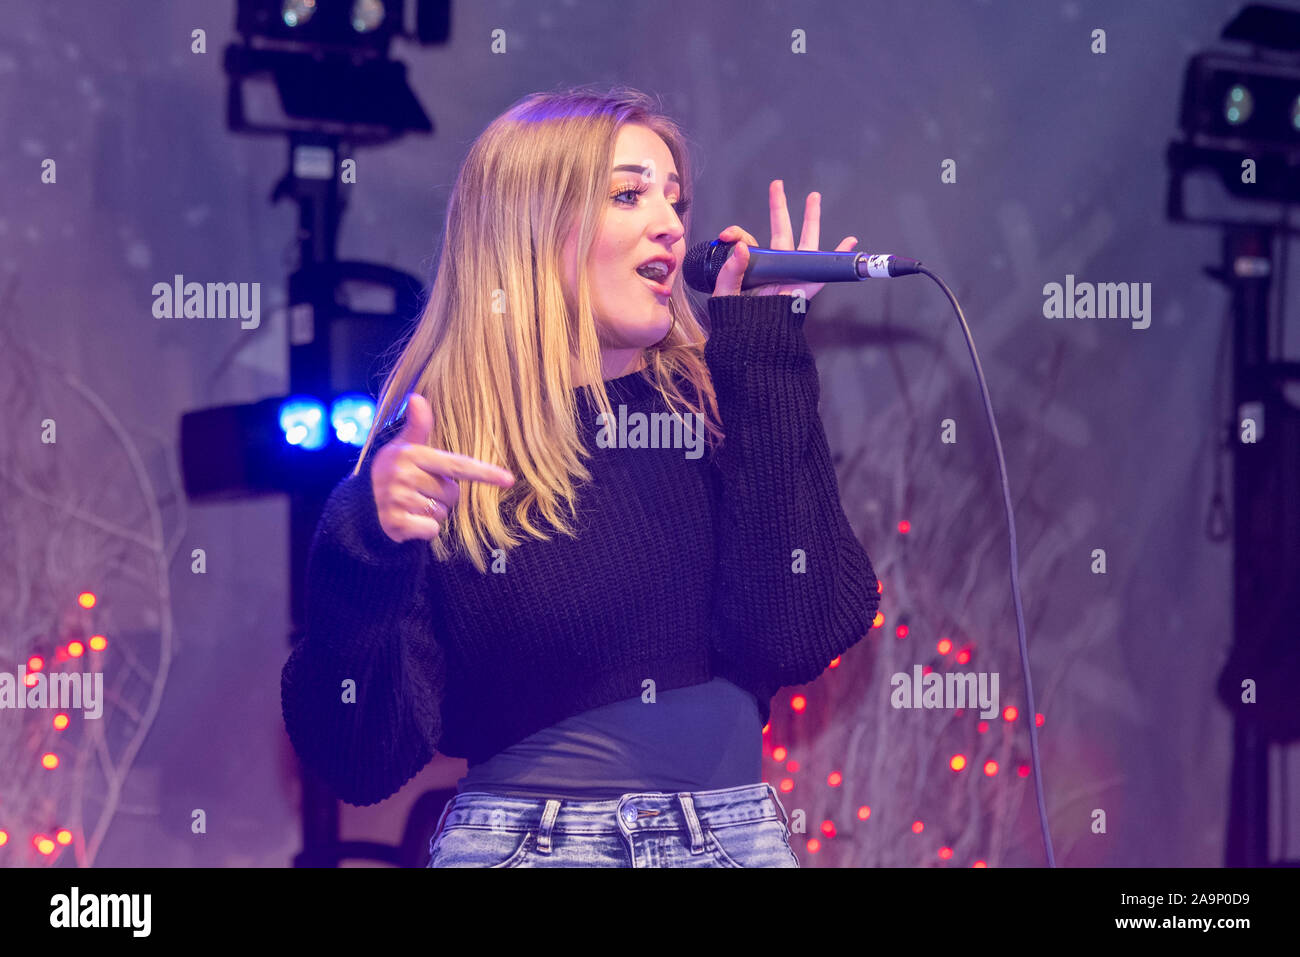 of girl group 2AM at the Southend on Sea Christmas lights switch on event in the High Street, Southend, Essex, UK. By Southend BID Stock Photo